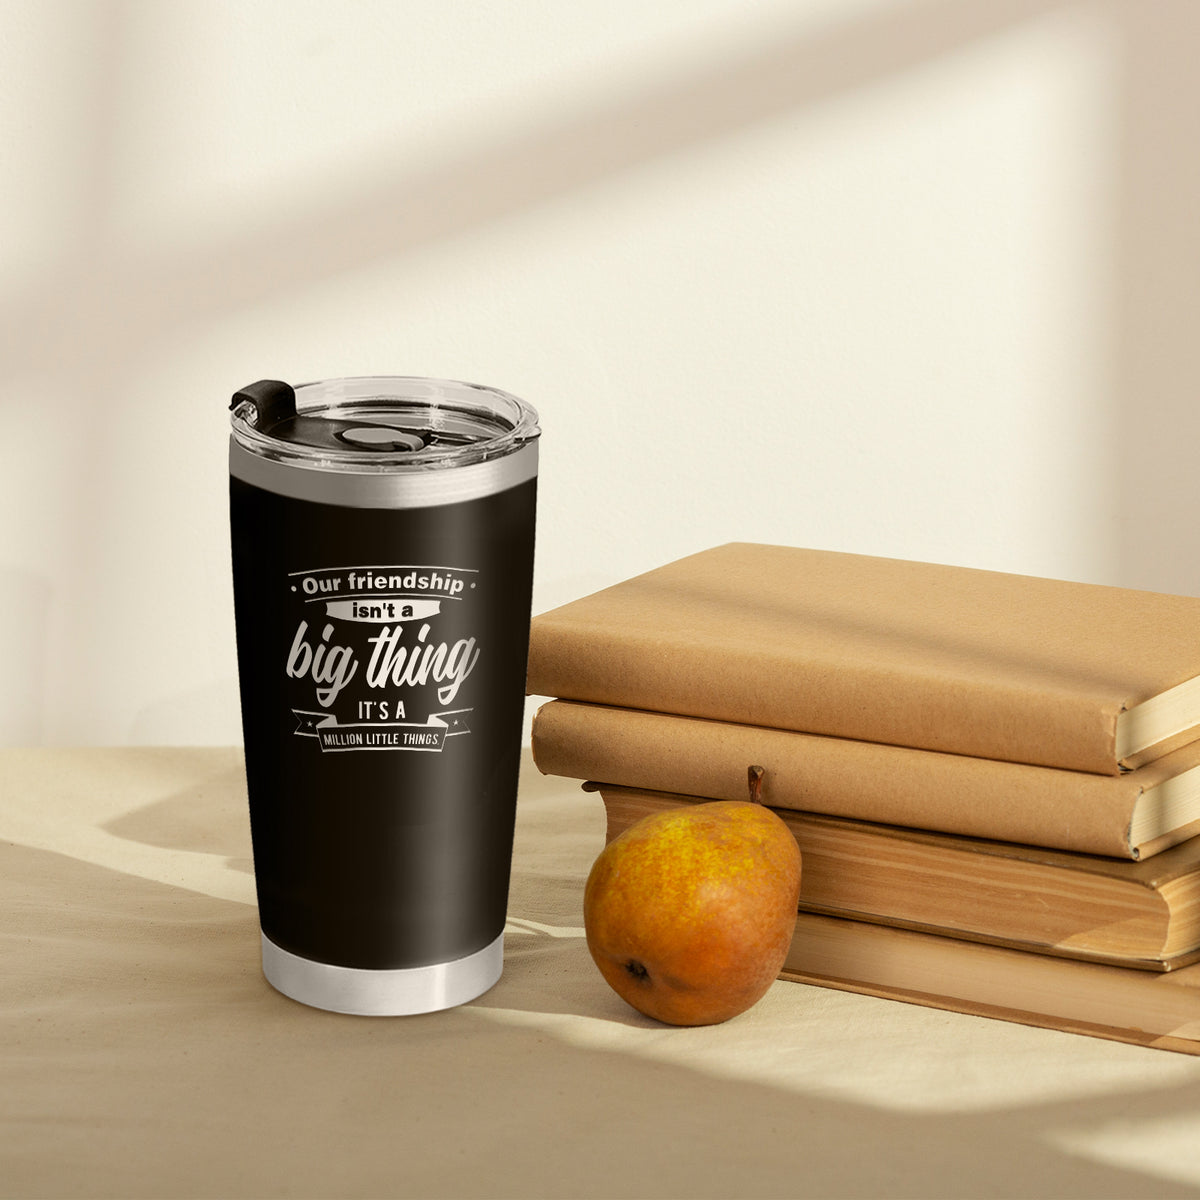 Friendship Isn't A Big Thing Personalized Tumbler with Engraved Name